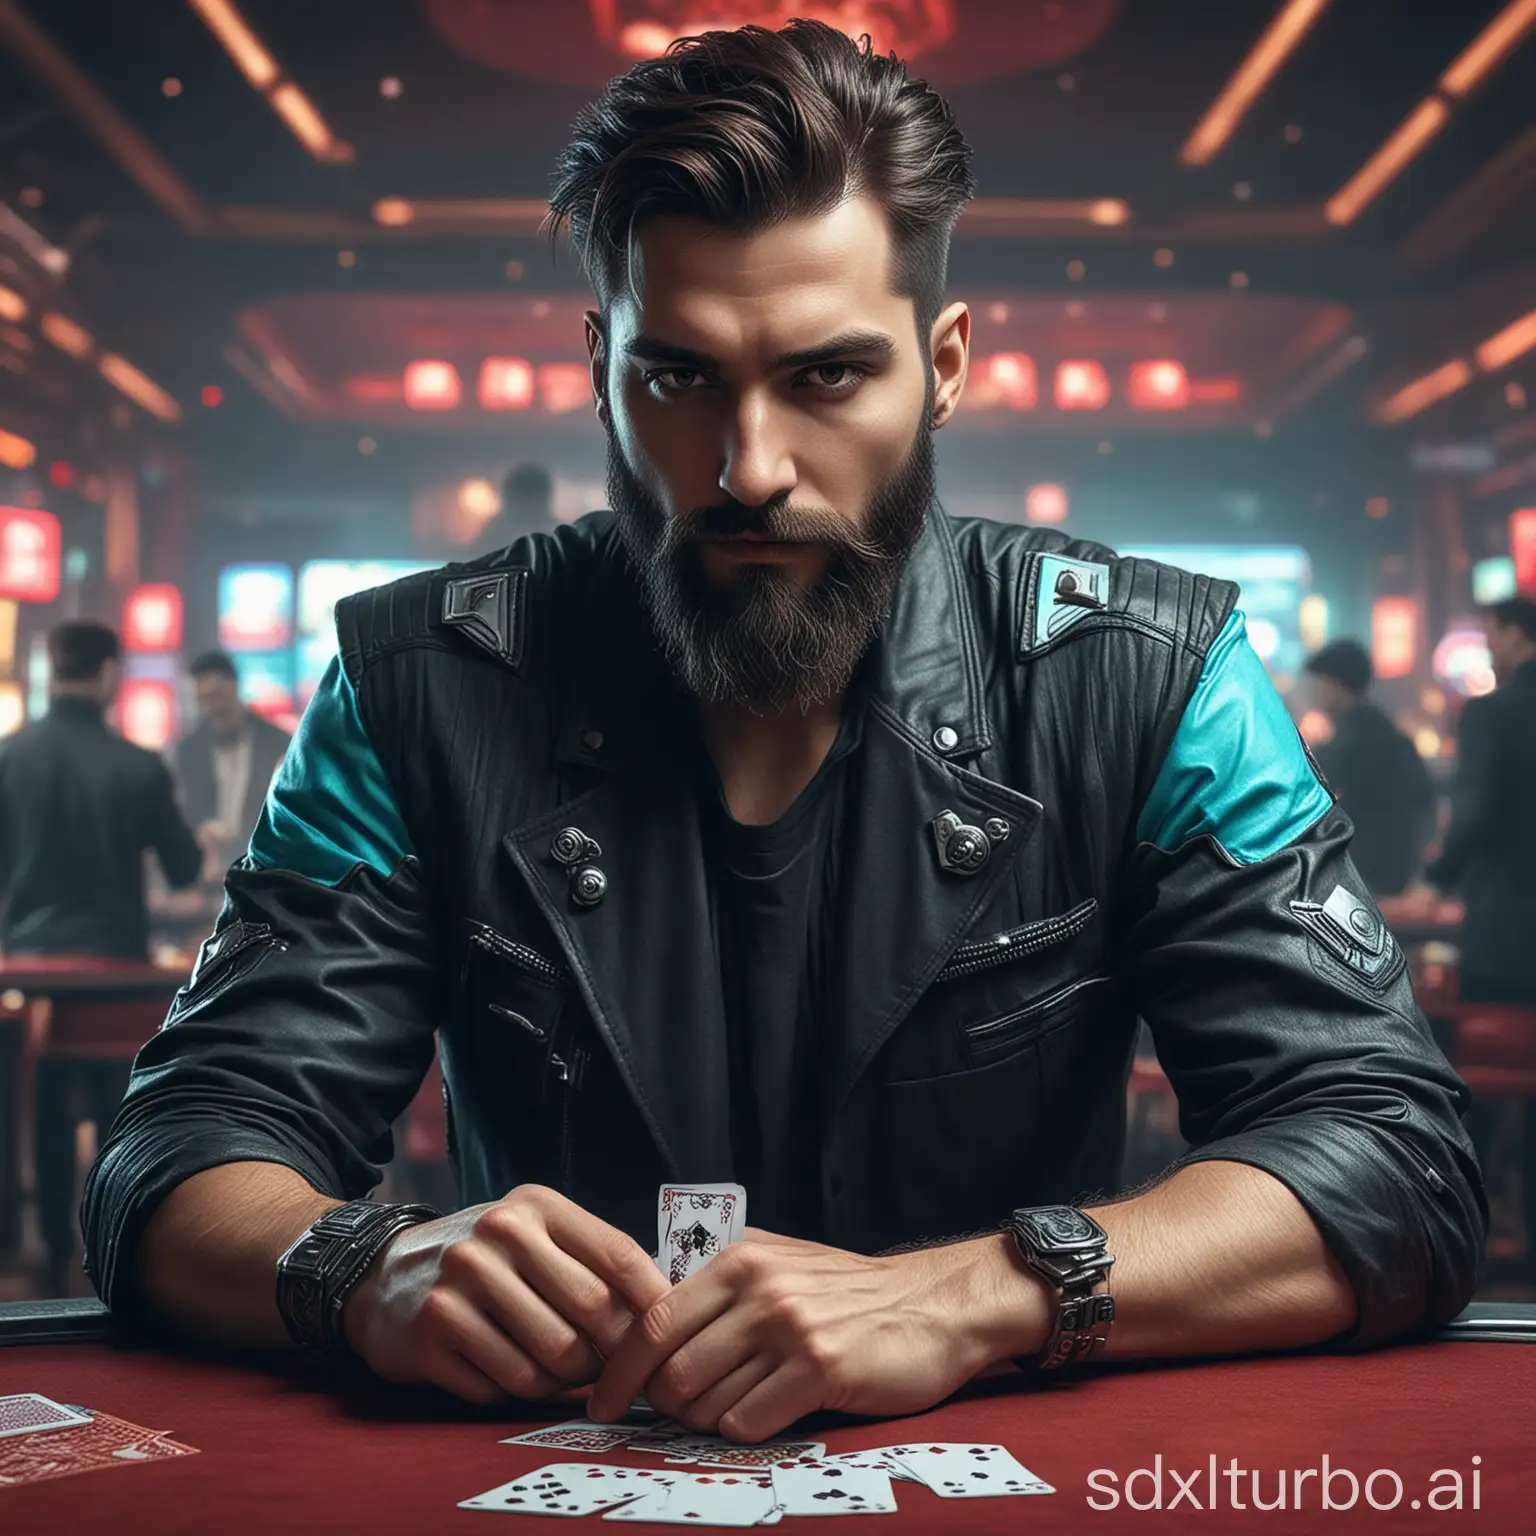 Cyberpunk-Man-Holding-Cards-at-Casino-Table-Futuristic-Game-Promotion